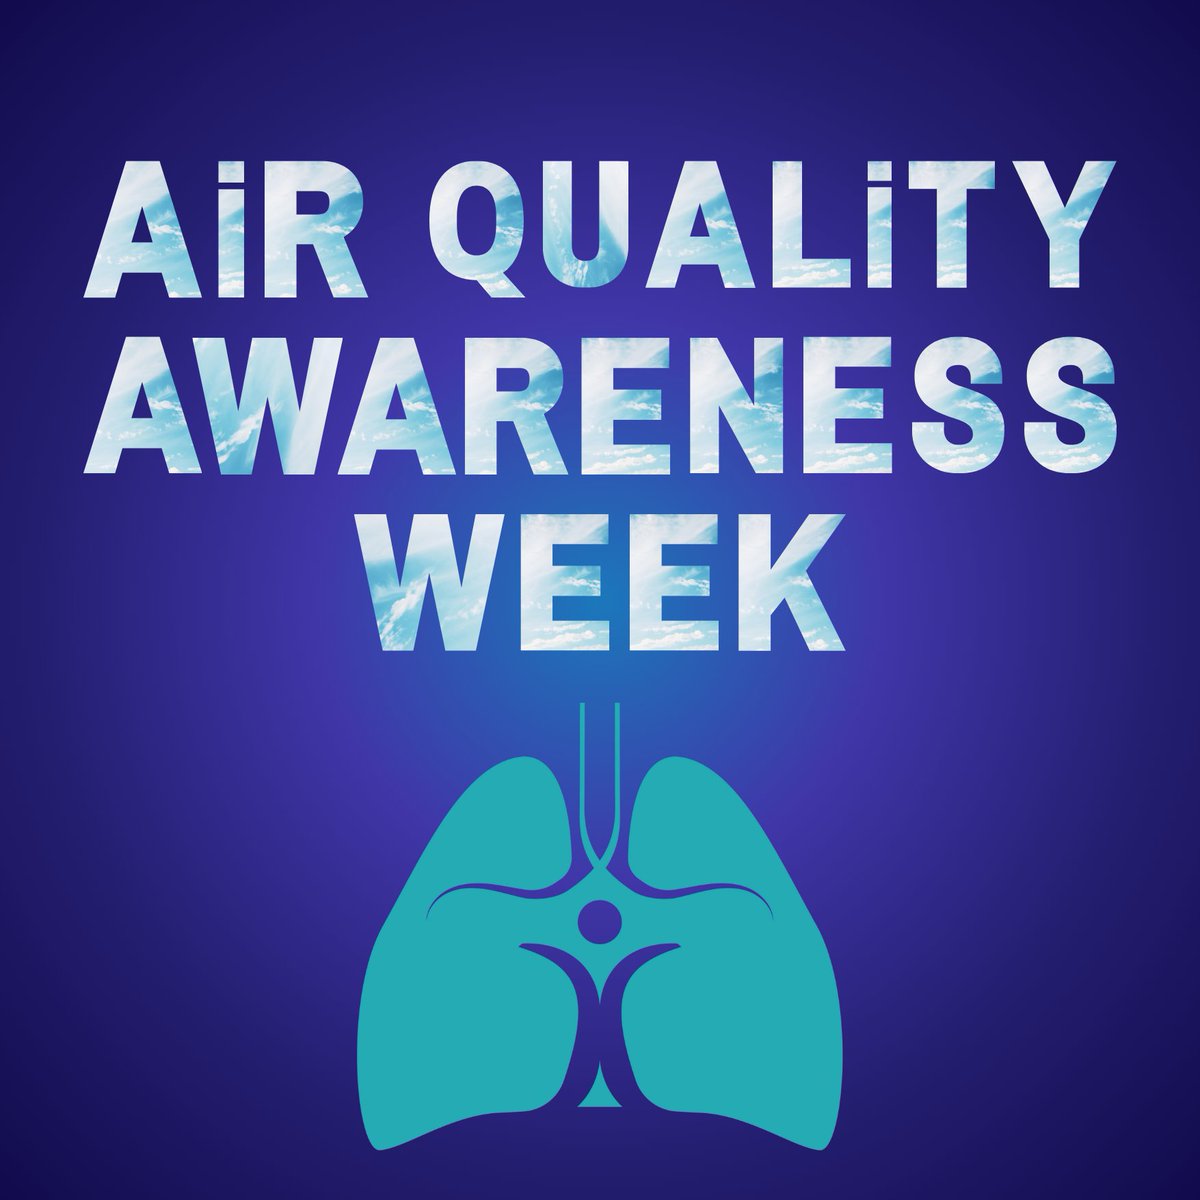 Air Quality Awareness Week is May 6-10 and highlights resources that increase air quality awareness and encourages people to take action by incorporating air quality knowledge into their daily lives. Each day we will feature an important air quality topic with info and resources.